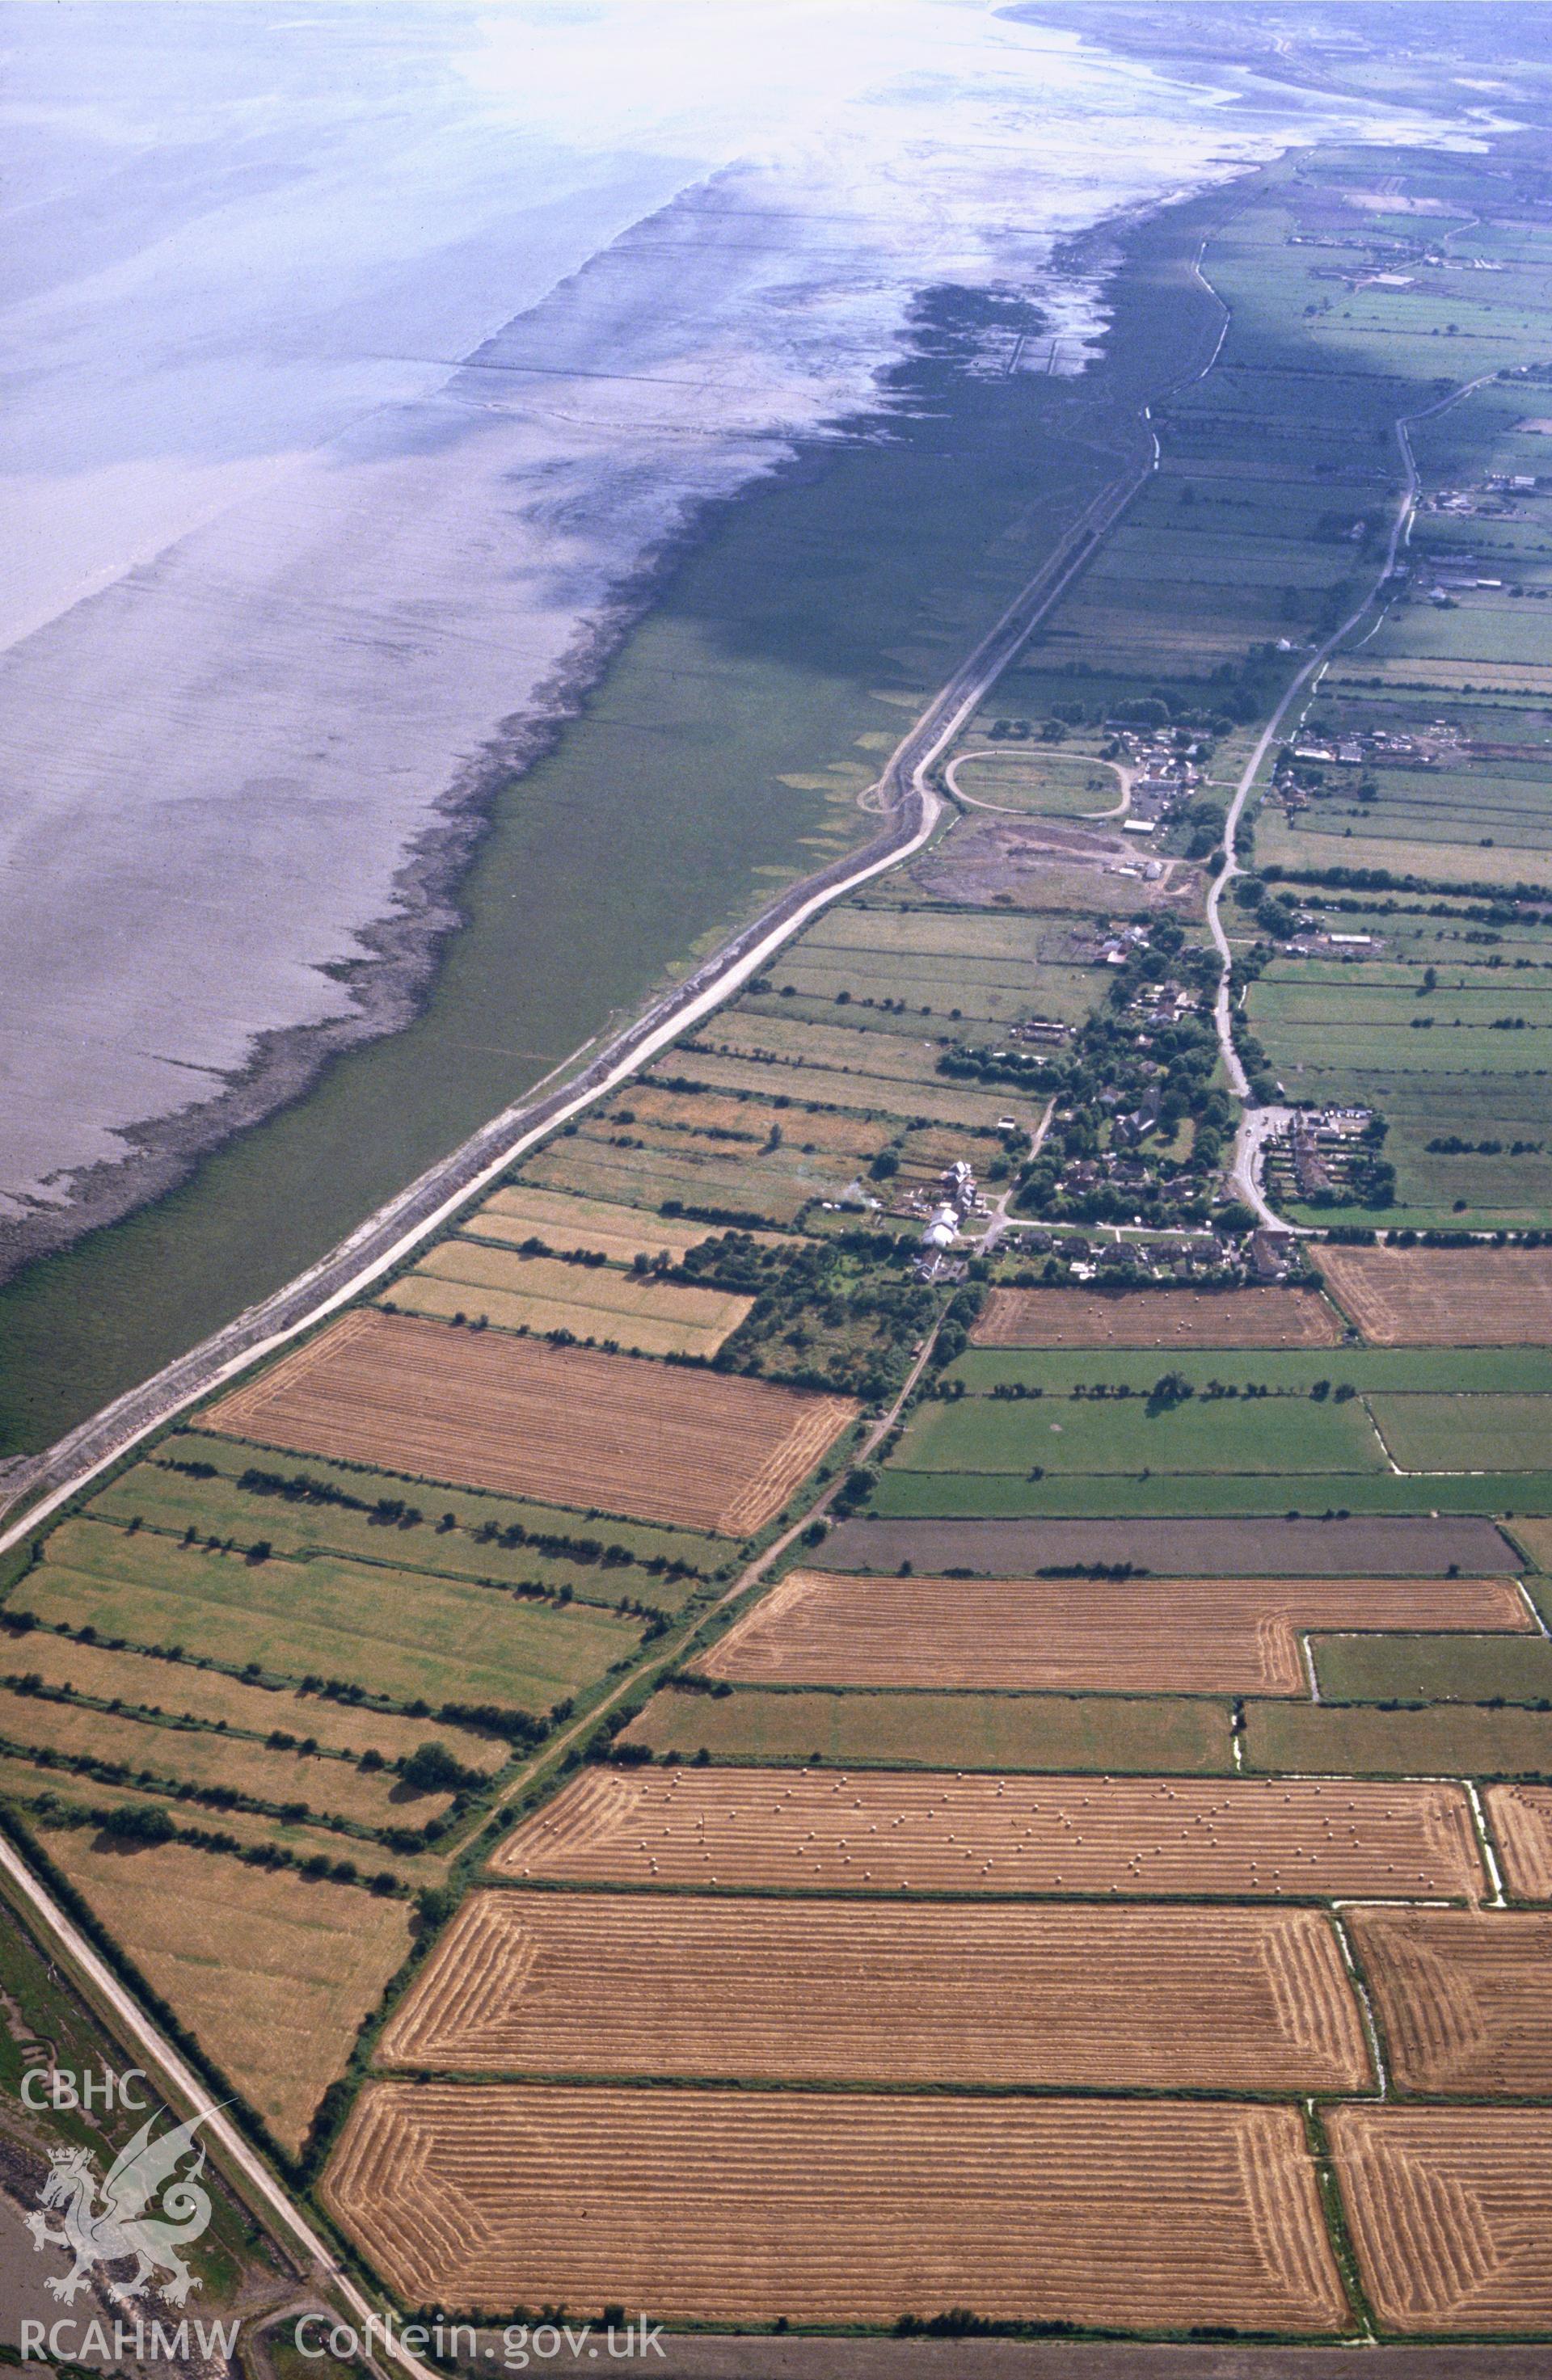 Slide of RCAHMW colour oblique aerial photograph of Wentlooge Levels, taken by C.R. Musson, 1990.